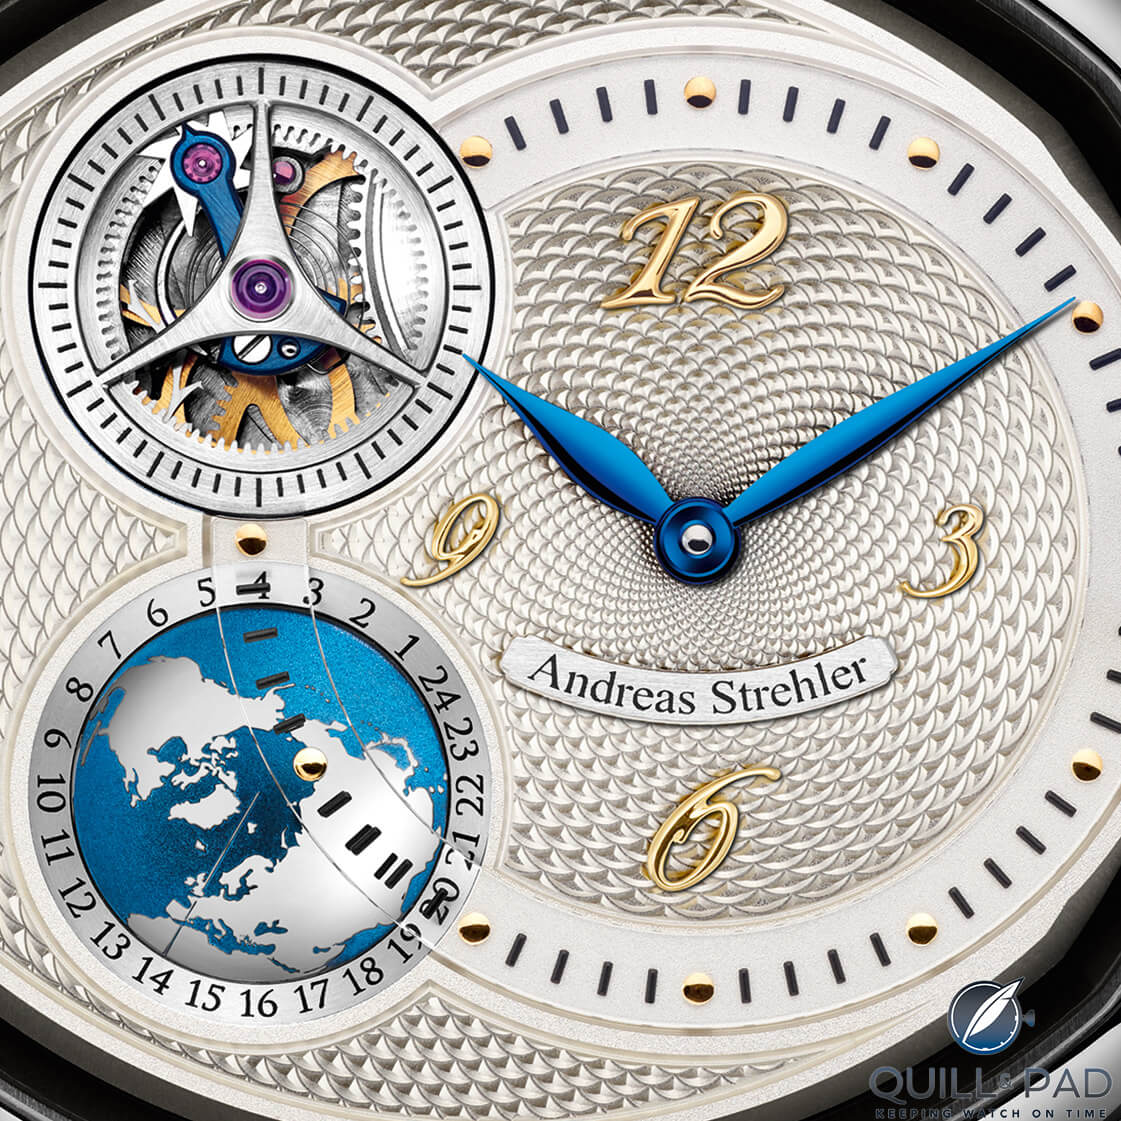 A close look at the silver-dialed Andreas Strehler Sauterelle à Heure Mondiale